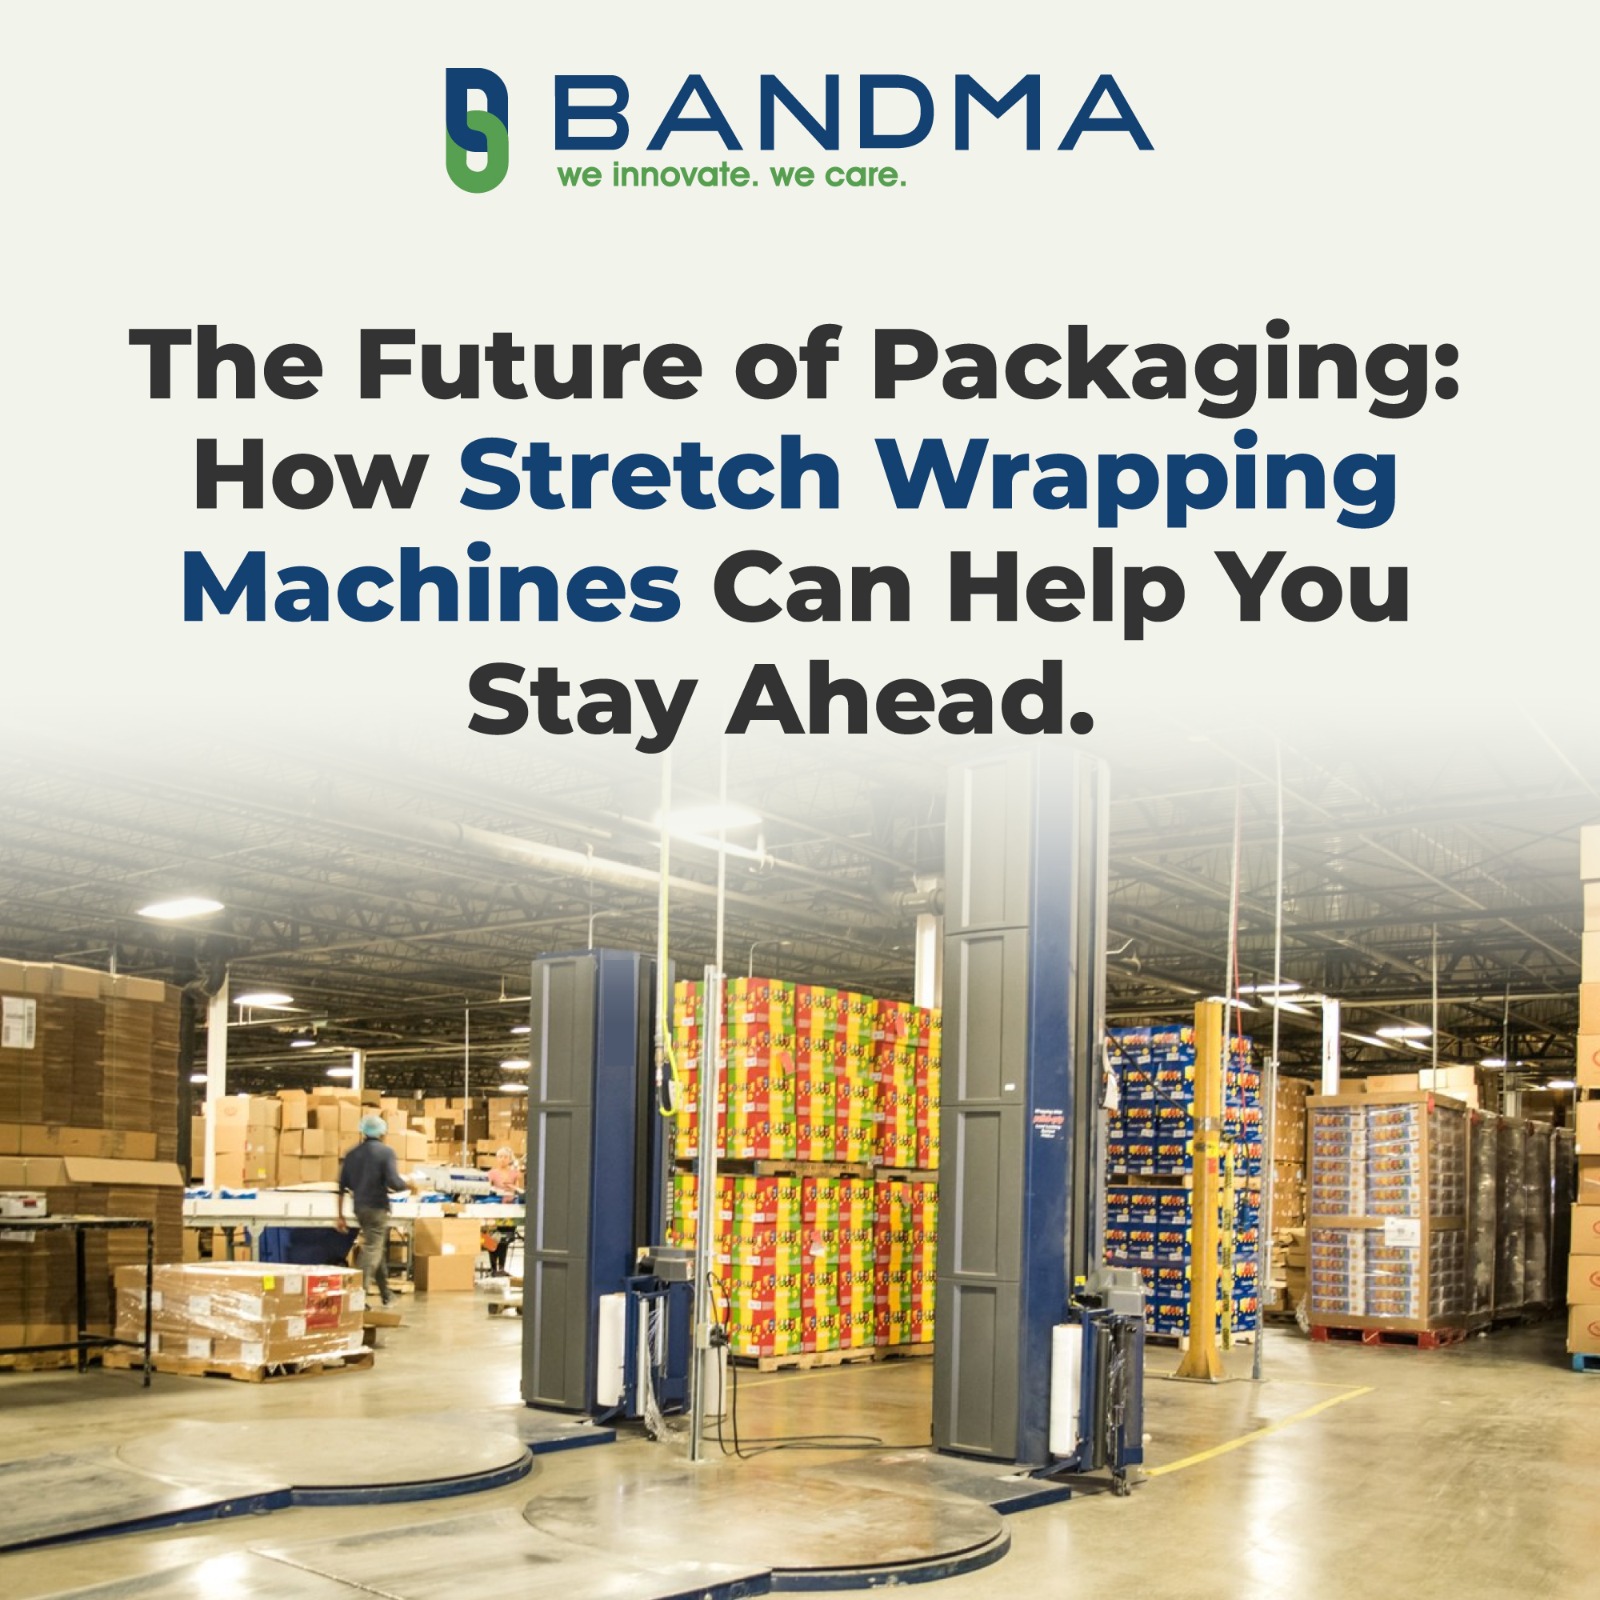 The Future of Packaging How Stretch Wrapping Machines Can Help You Stay Ahead.